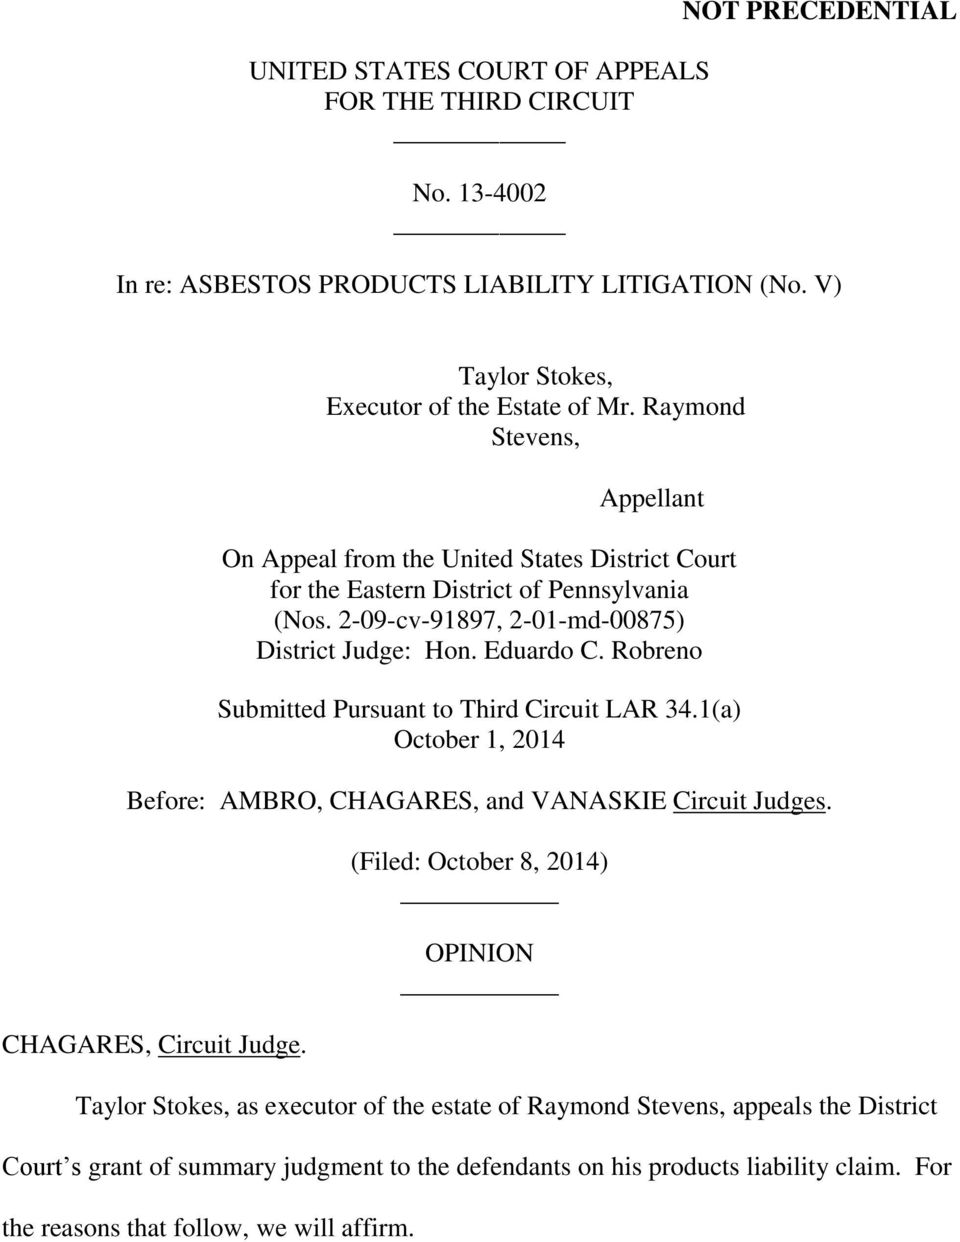 Robreno Submitted Pursuant to Third Circuit LAR 34.1(a) October 1, 2014 Before: AMBRO, CHAGARES, and VANASKIE Circuit Judges. CHAGARES, Circuit Judge.